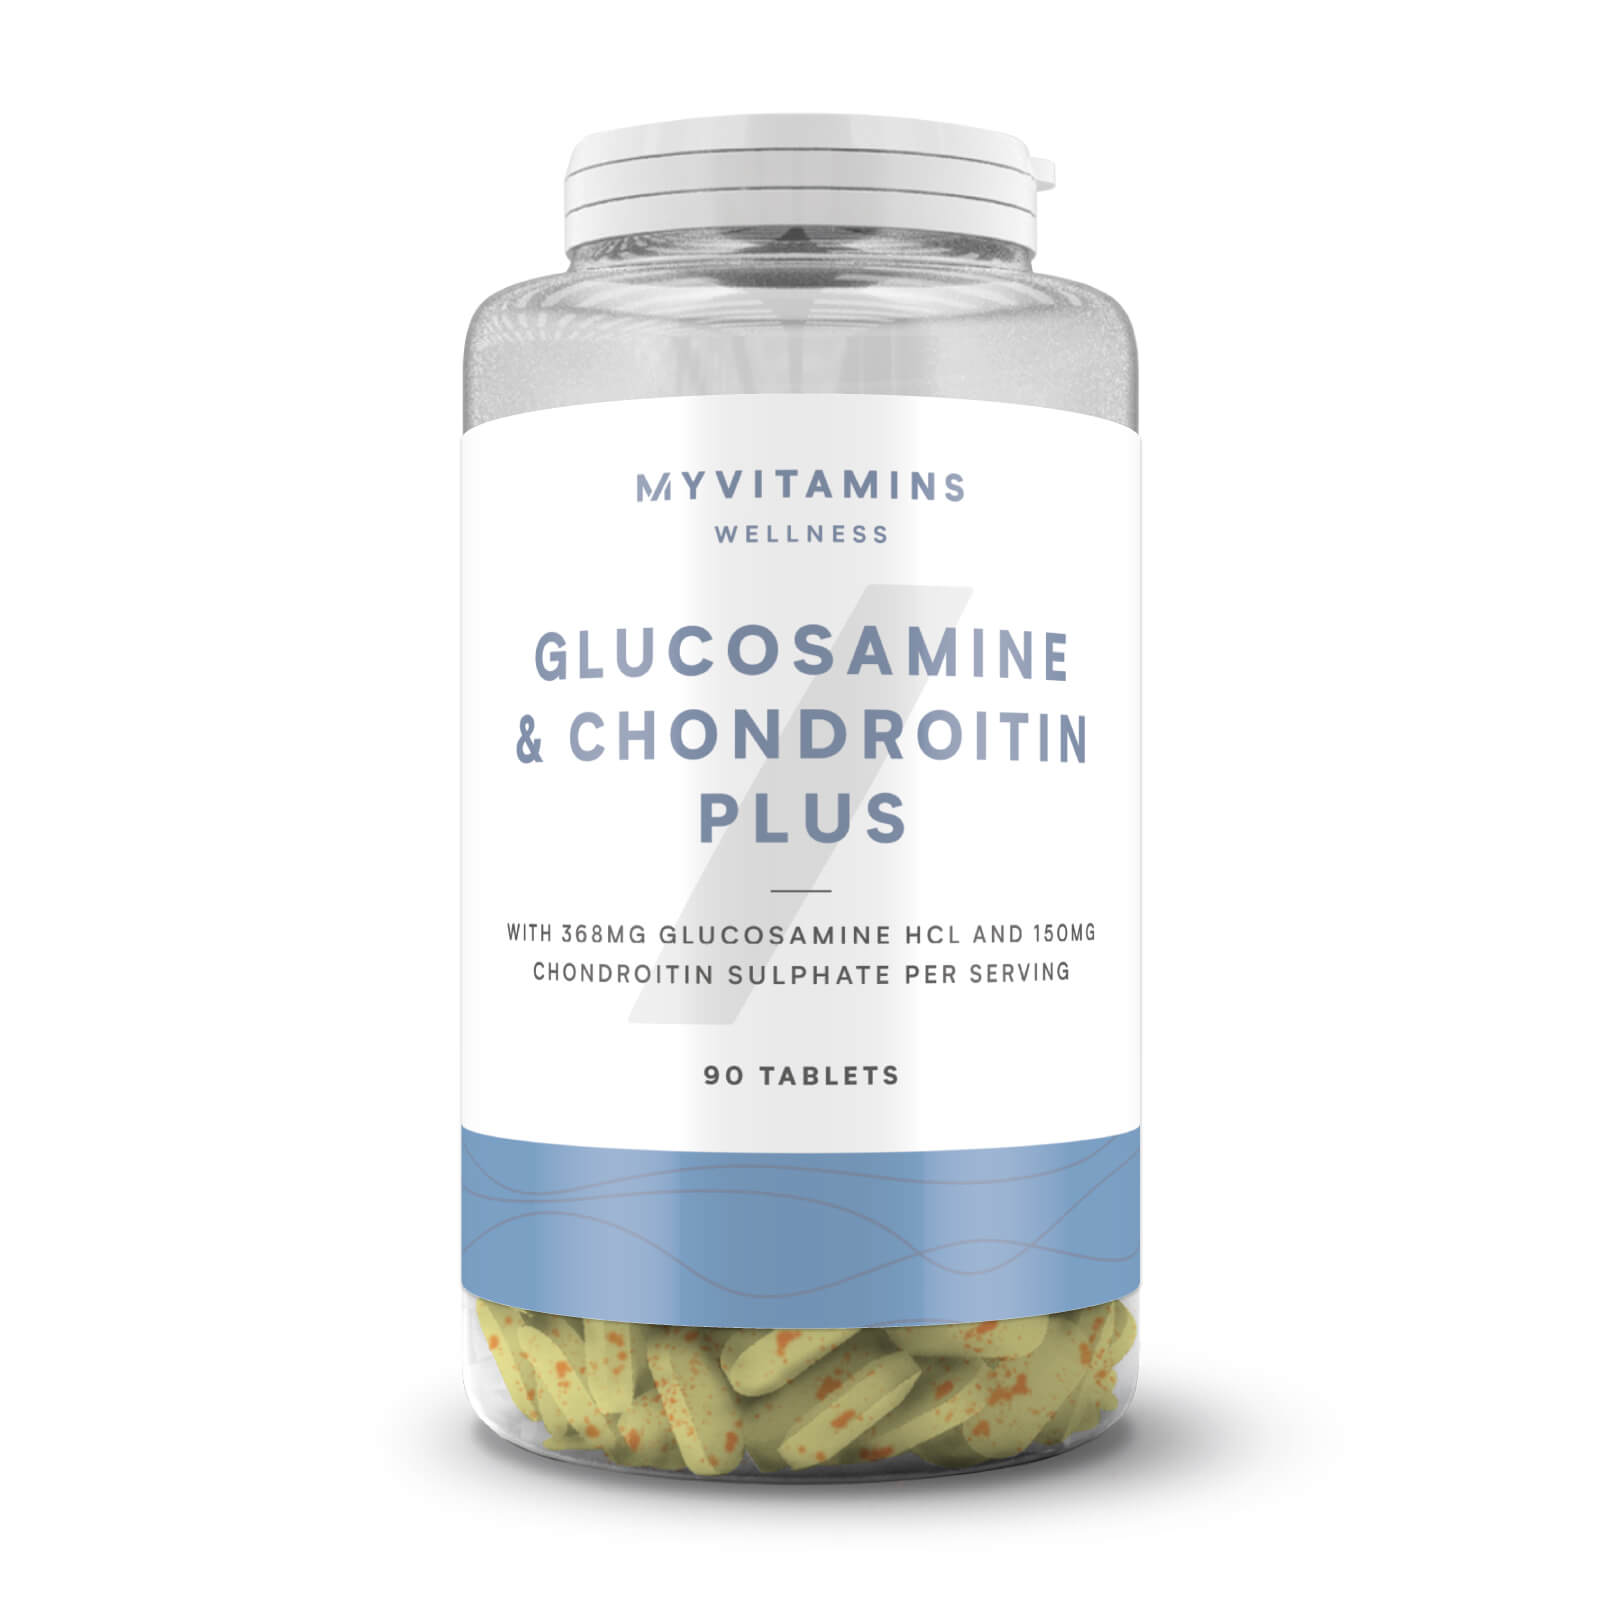 GlucosamineandChondroitin Plus Tablets - 90tablets